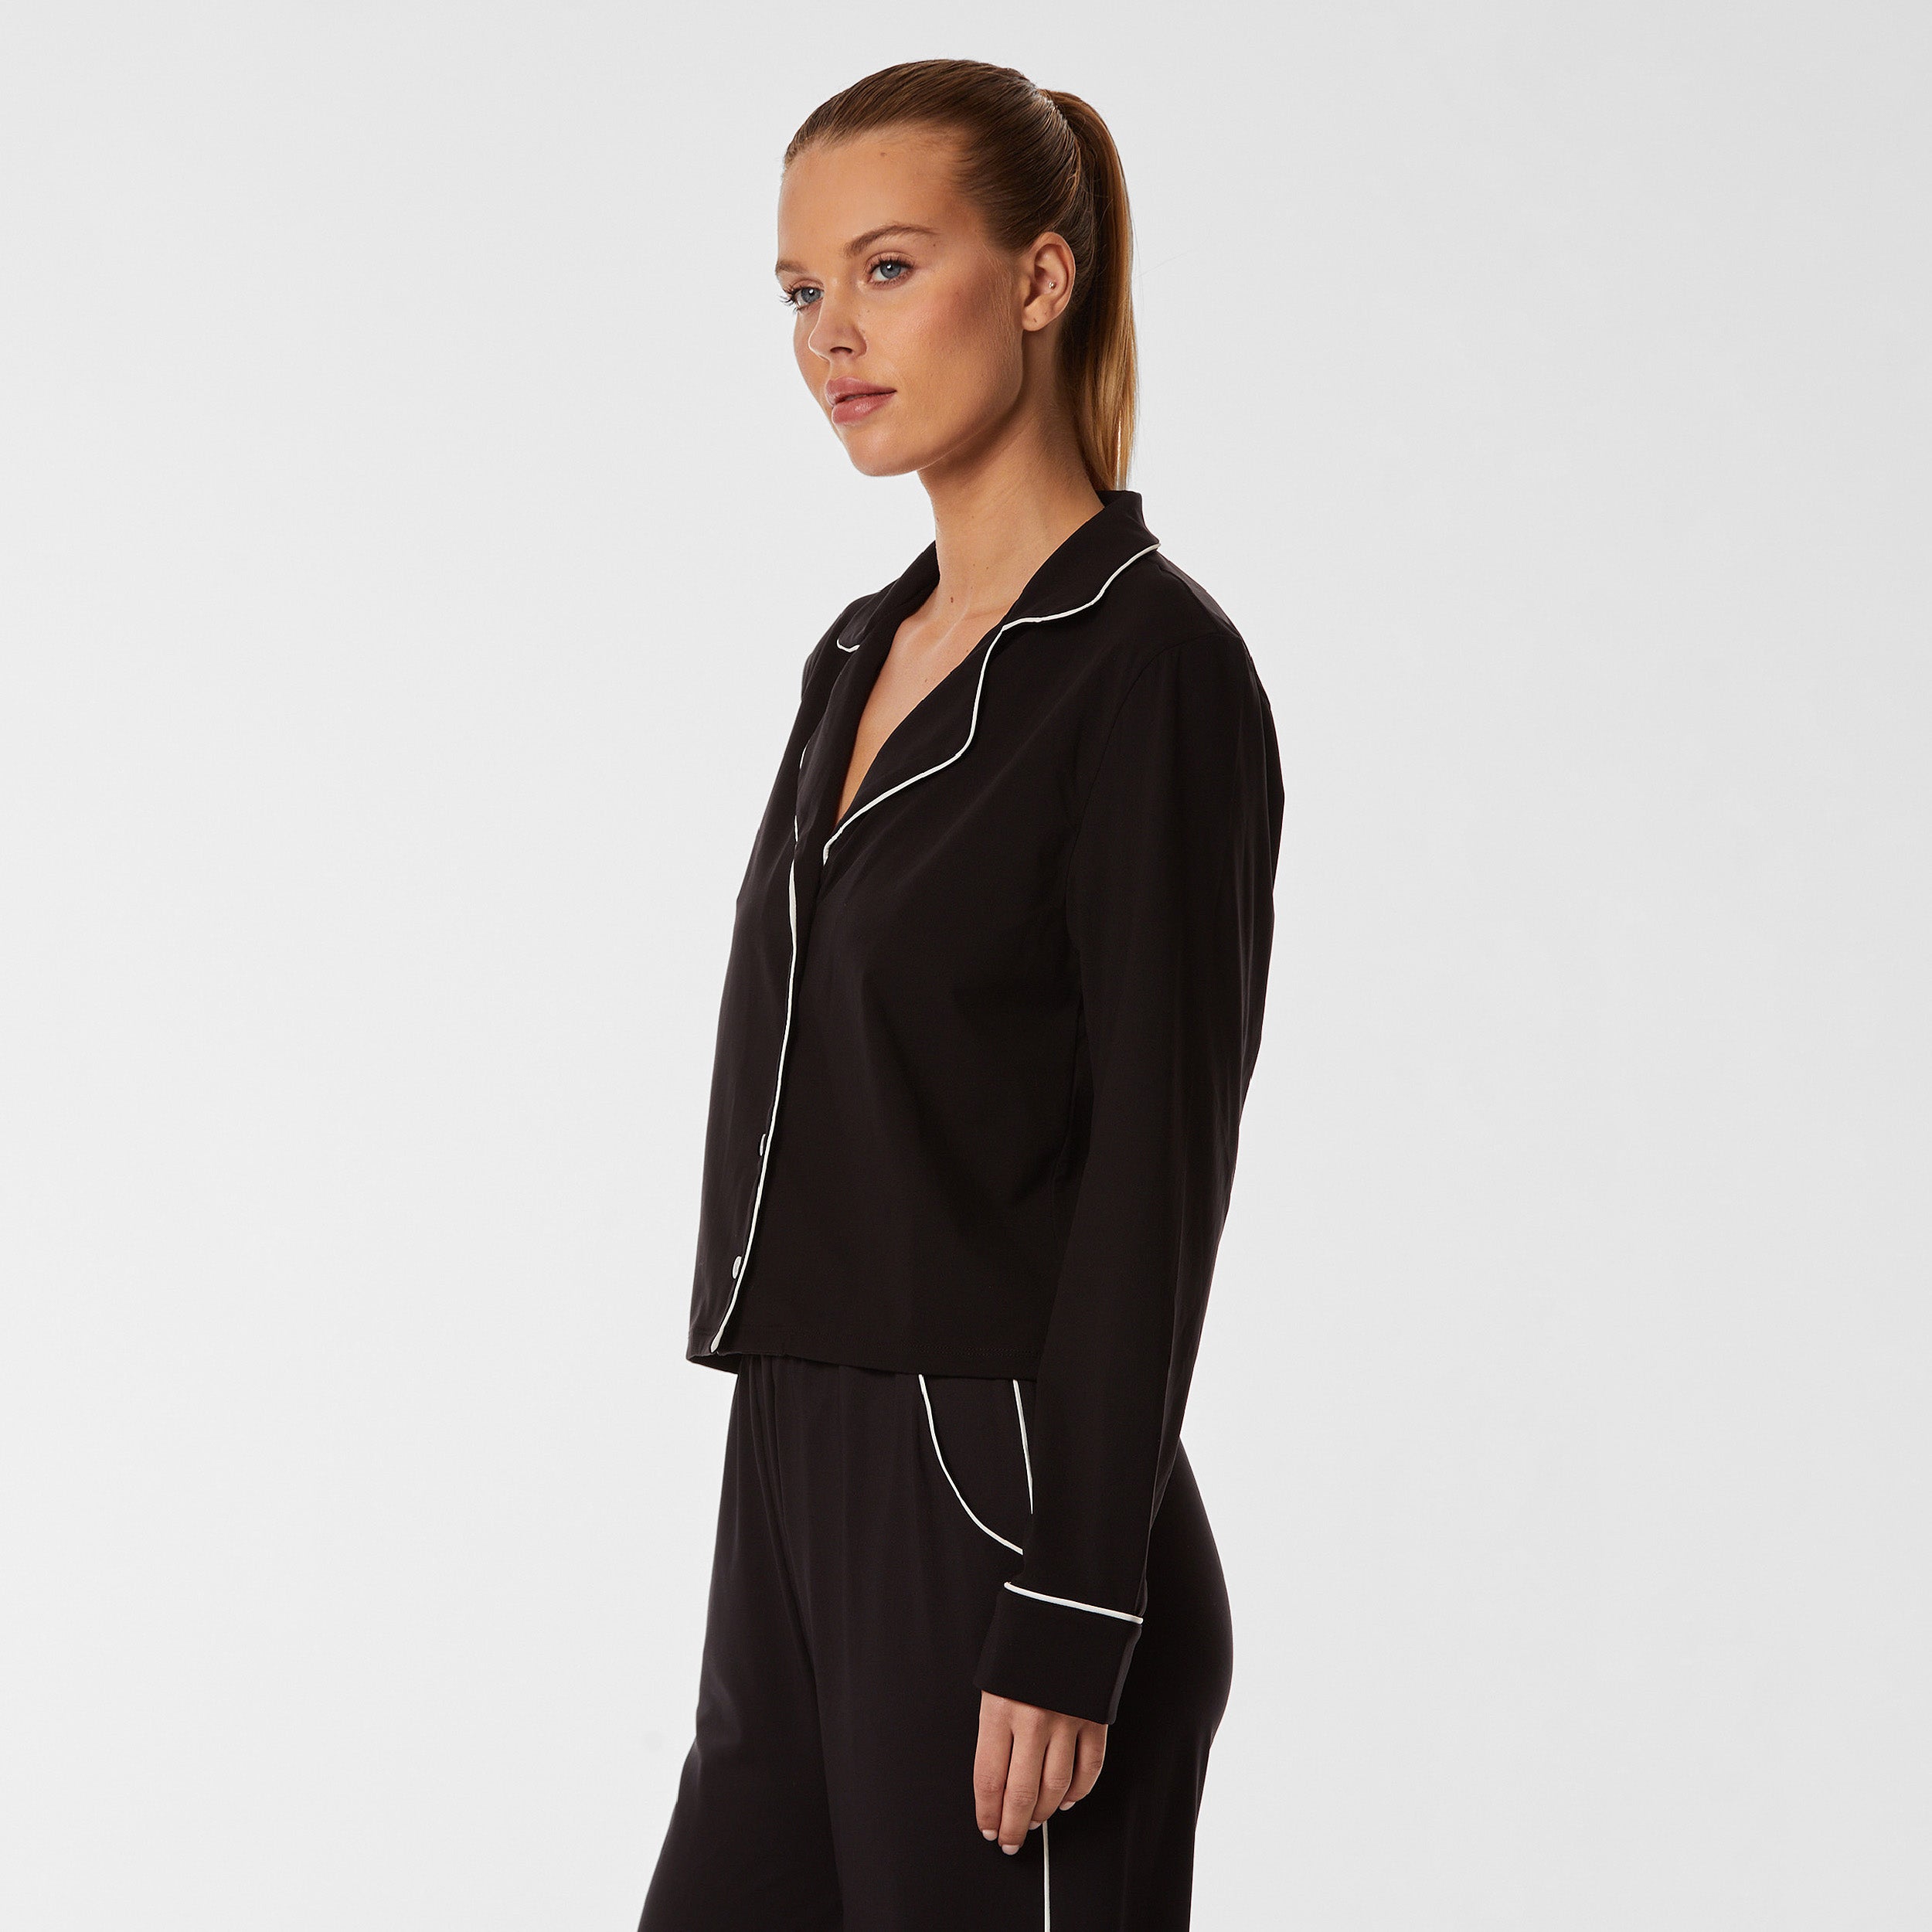 3/4 side view of woman wearing soft Black Pajama shirt with white piping detail and white buttons.